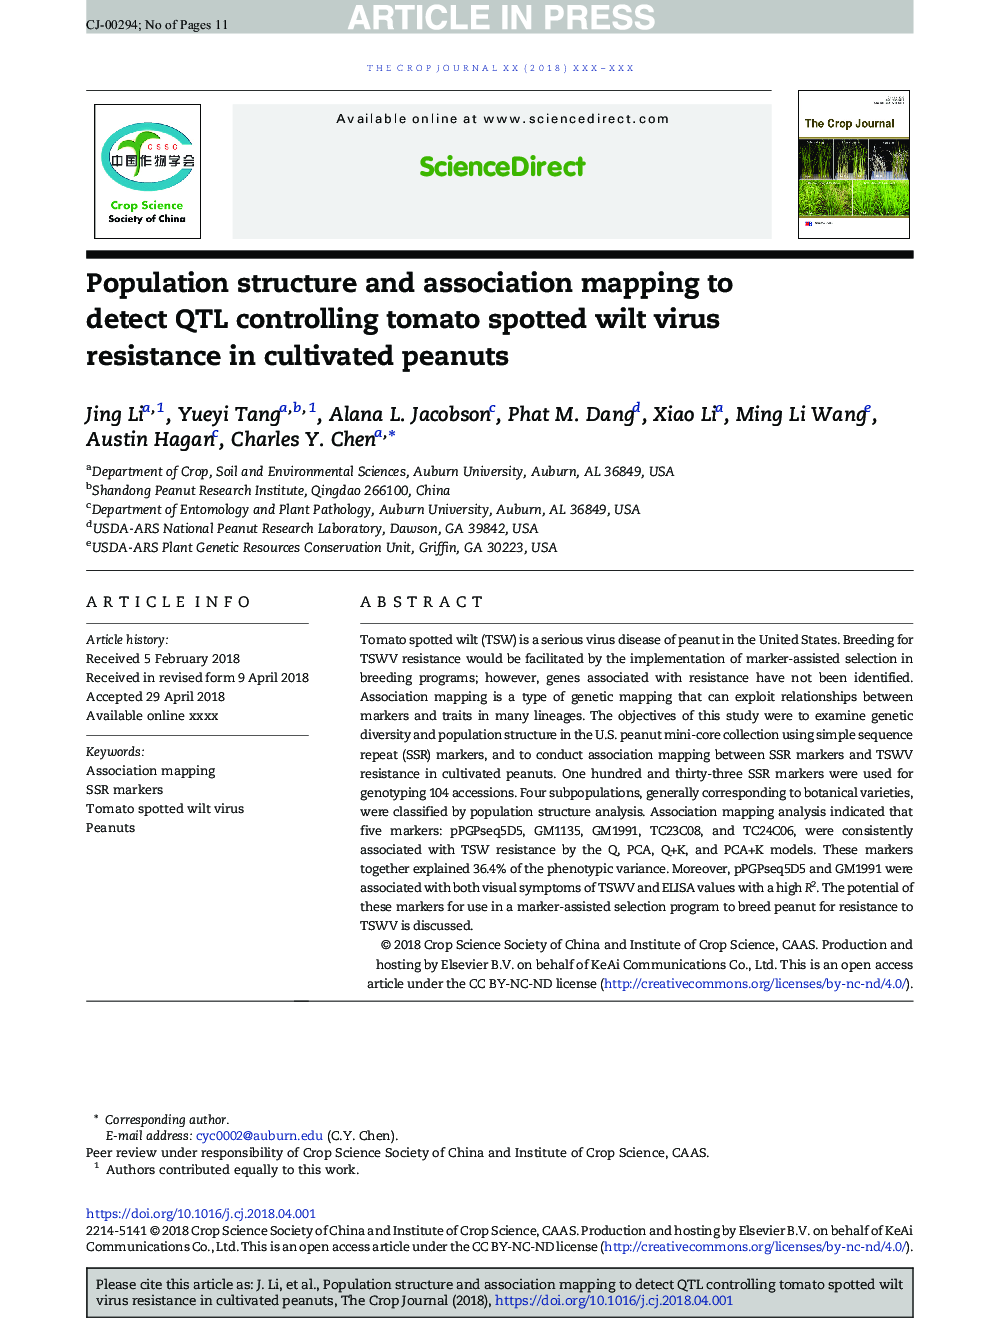 Population structure and association mapping to detect QTL controlling tomato spotted wilt virus resistance in cultivated peanuts